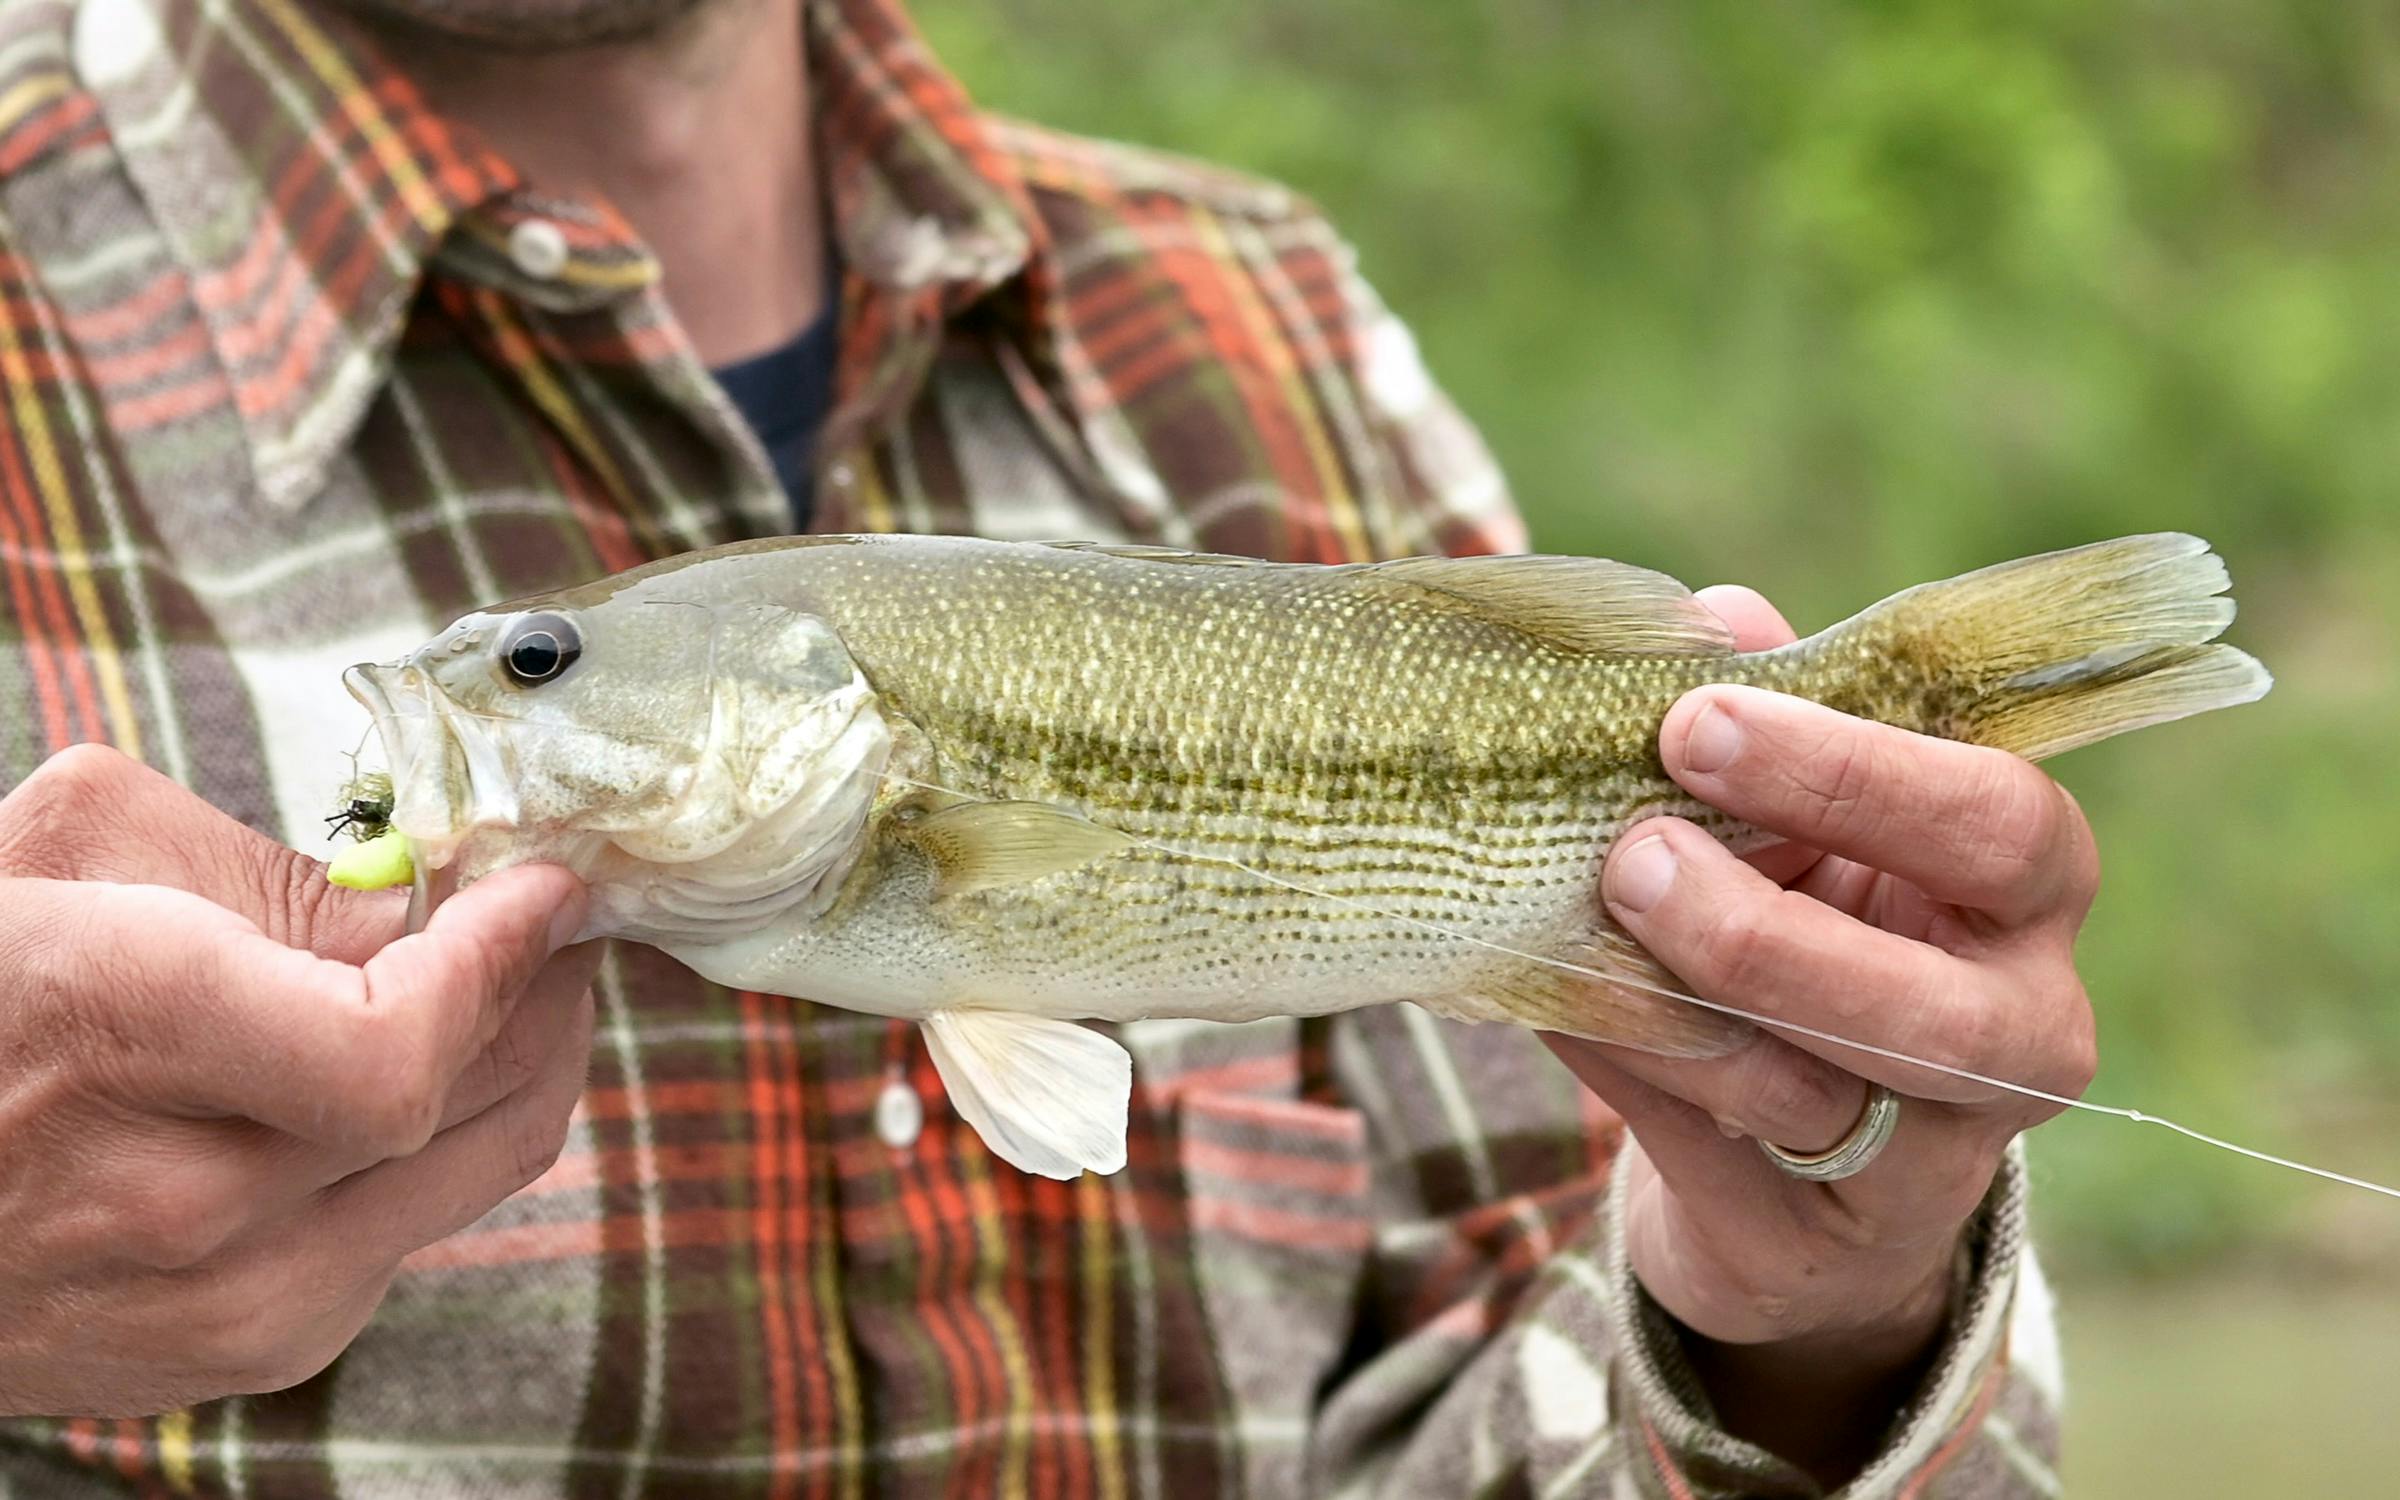 Fly fishing for sea bass: 4 useful steps for beginners